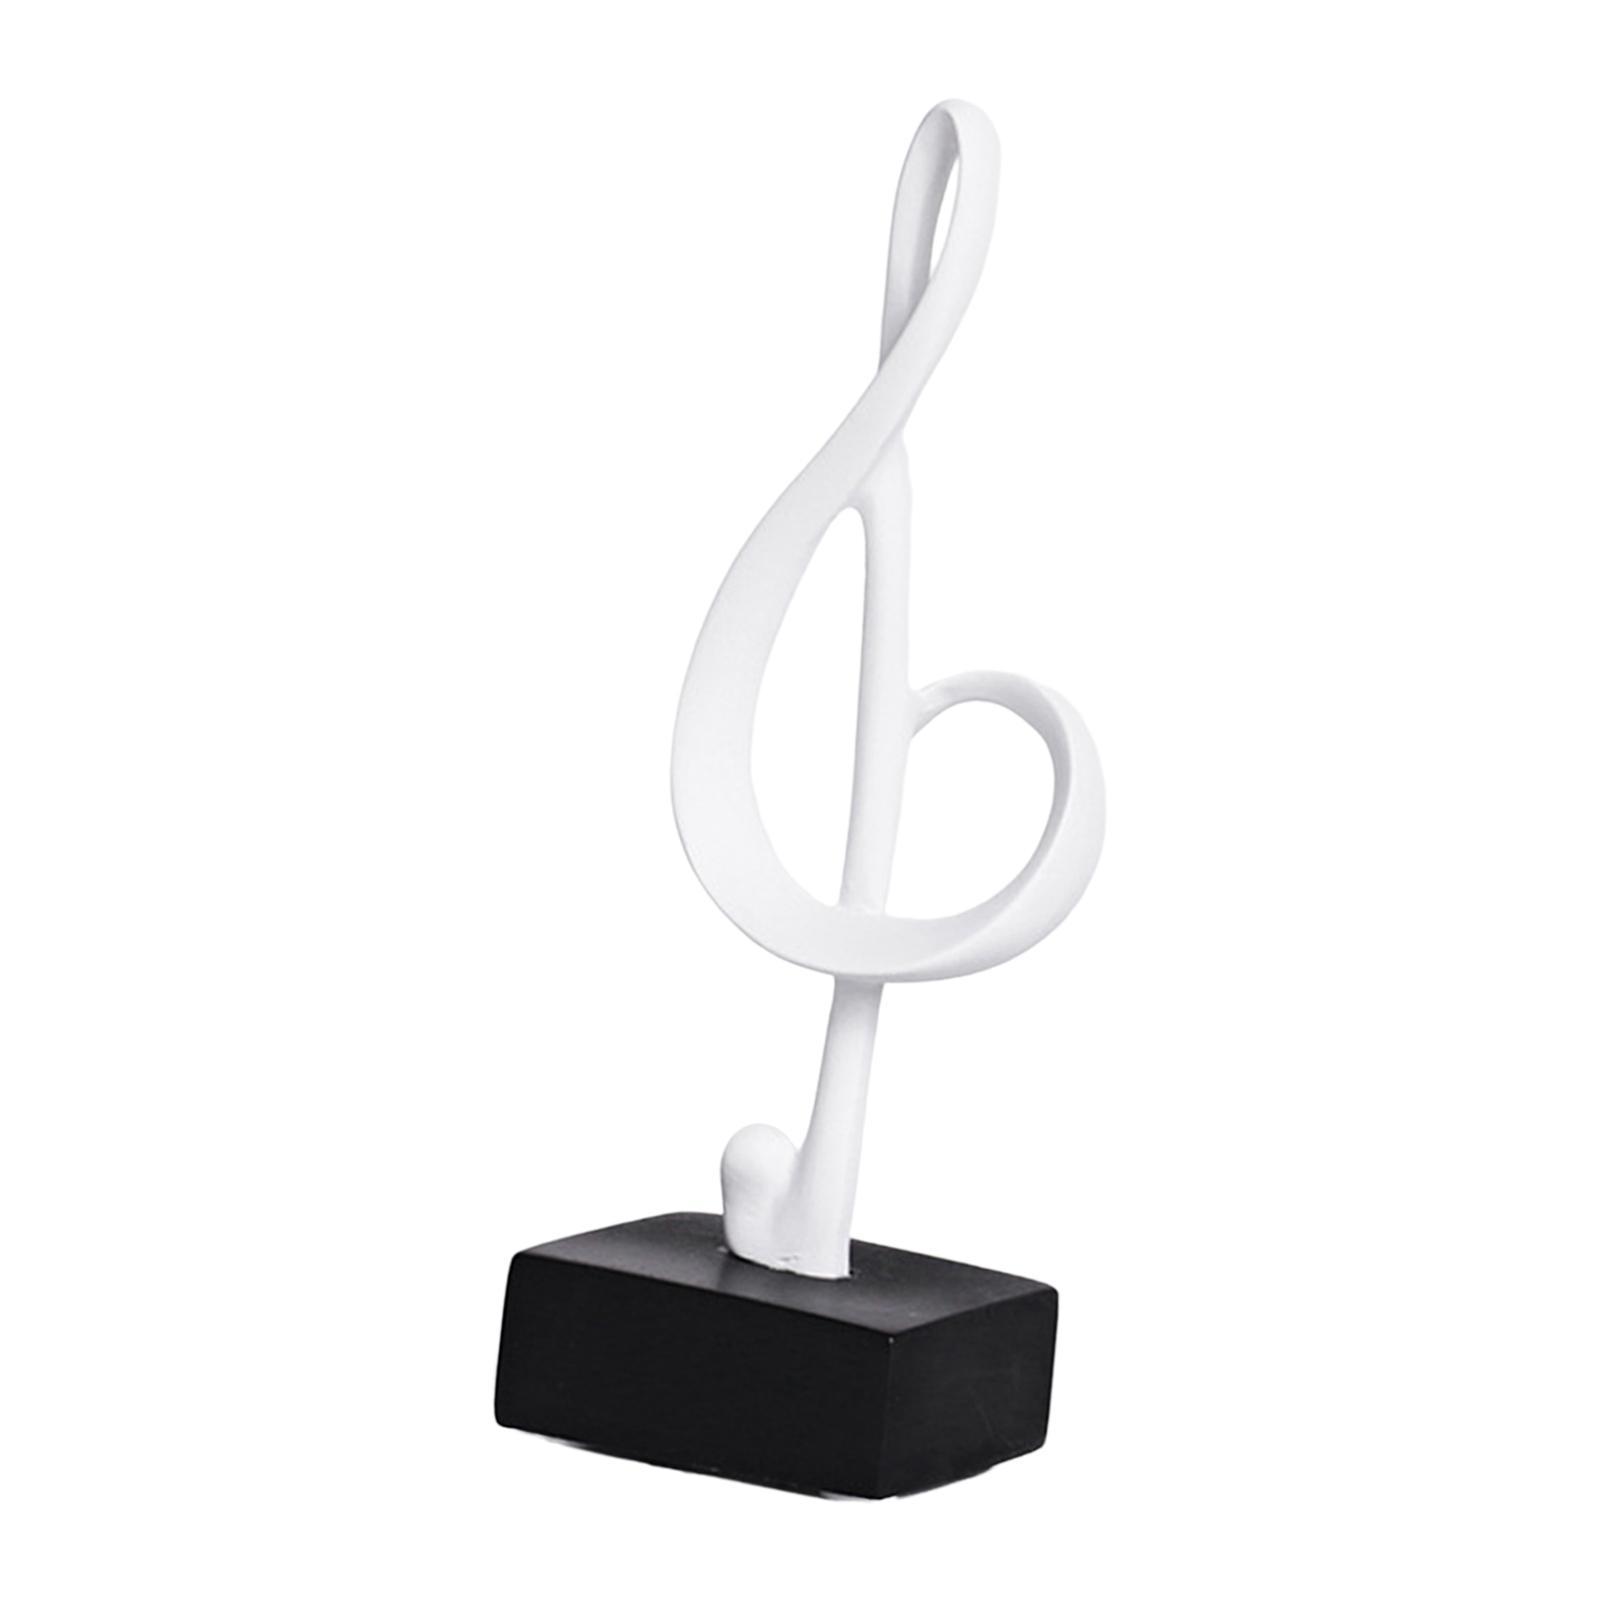 Creative Music Note Figurine Resin Statue Sculpture Artwork for Living Room office and home Decoration